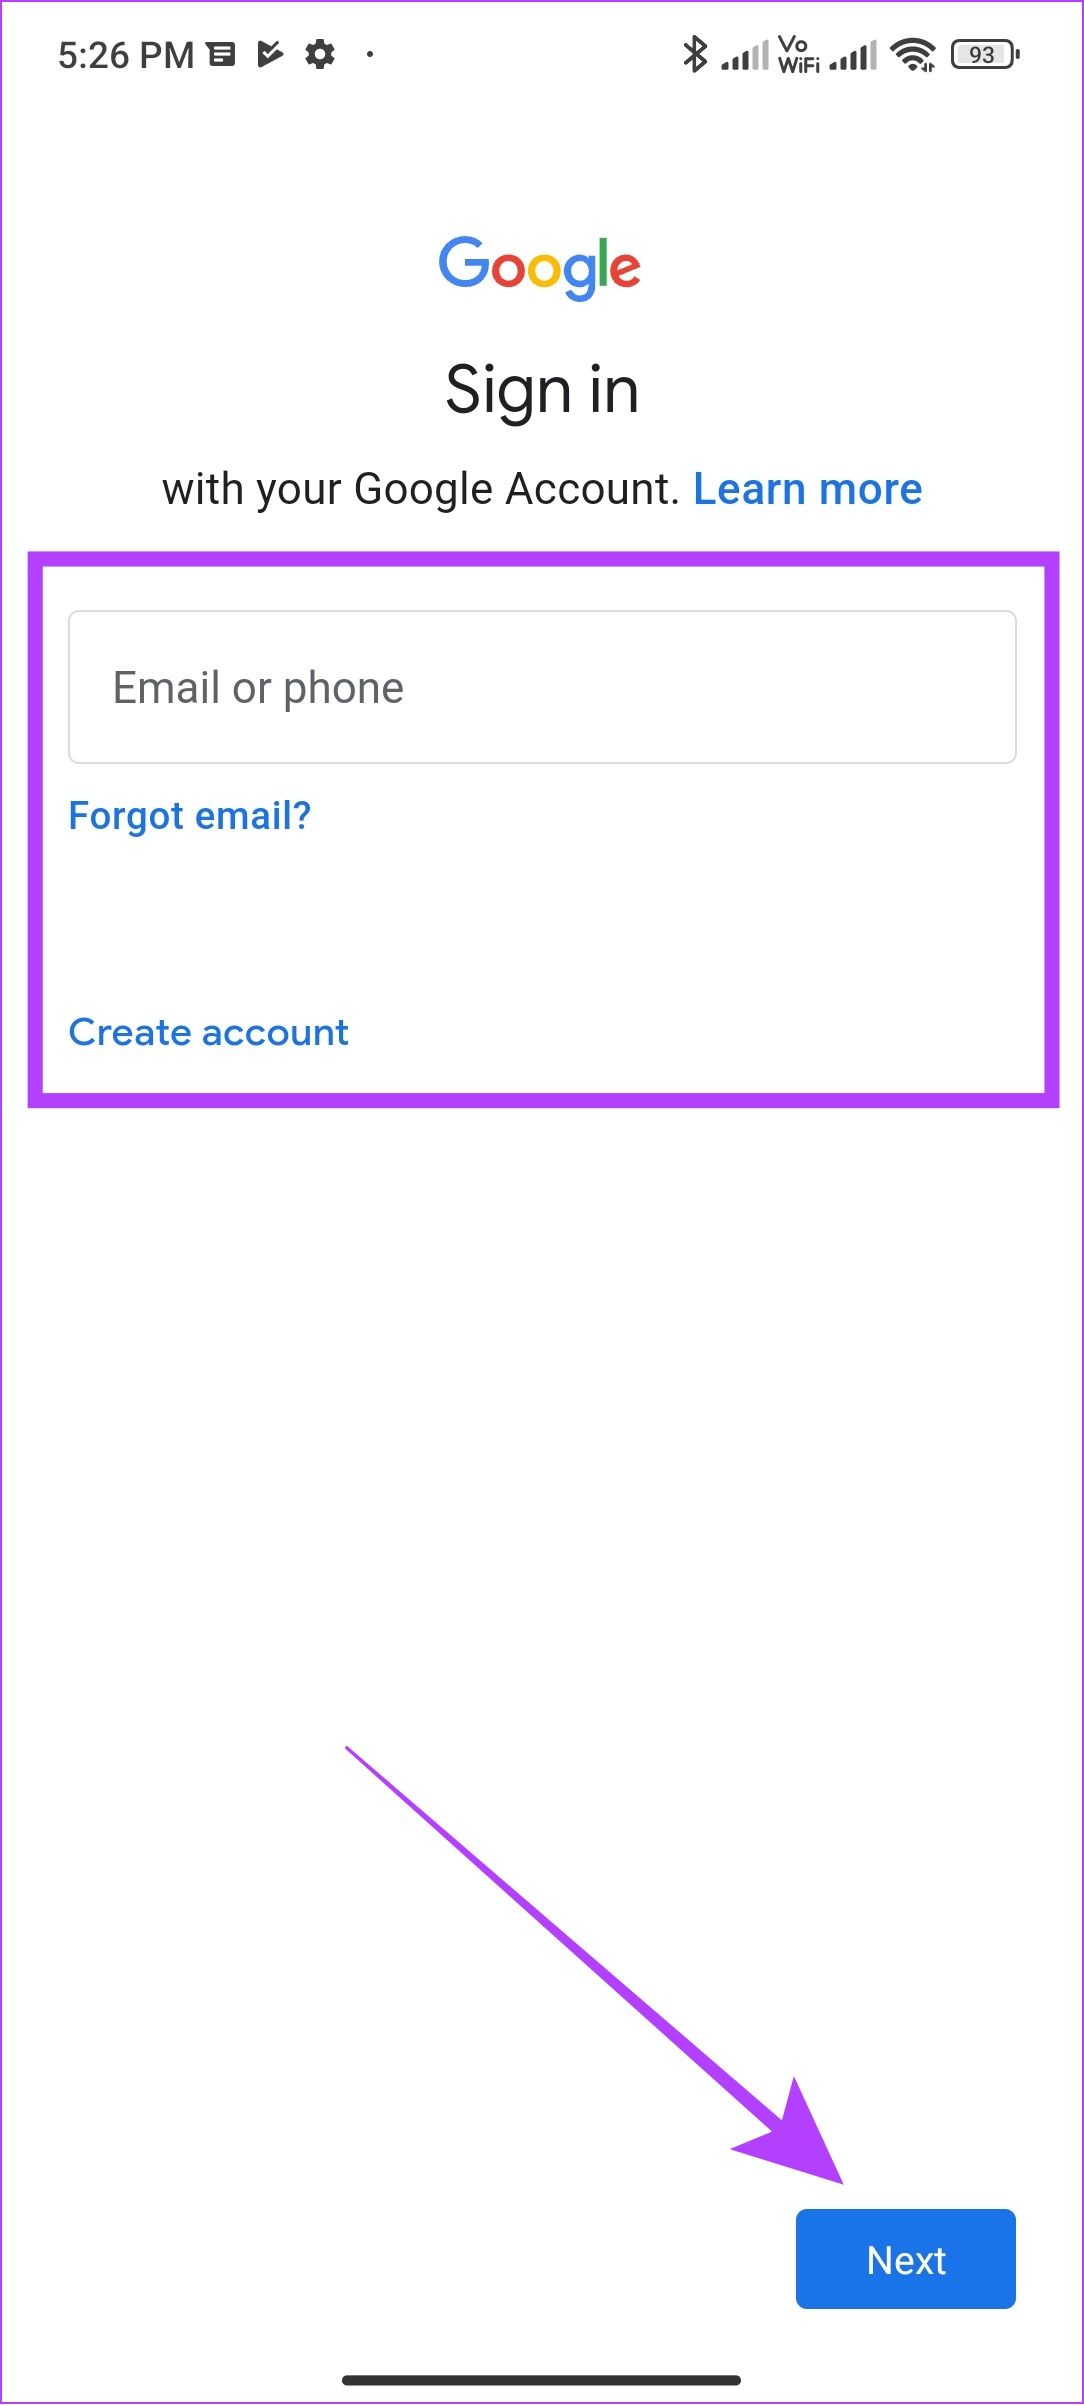 add your gmail id and tap Next